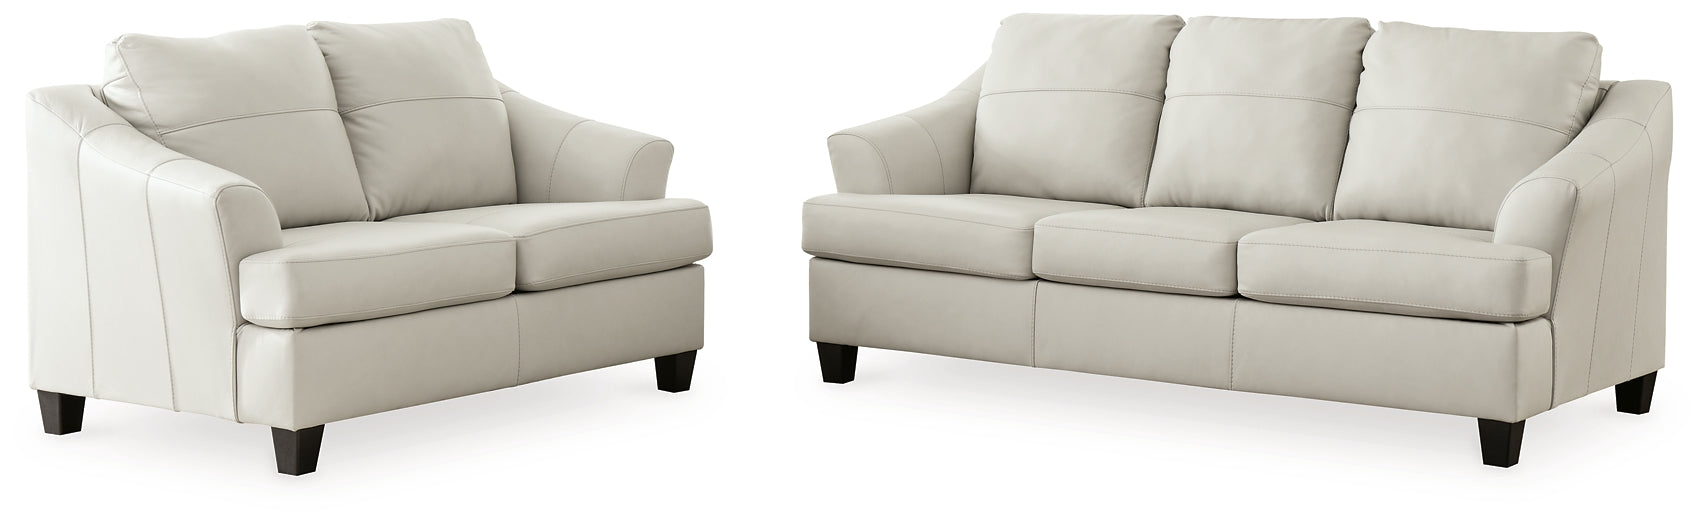 Genoa Sofa and Loveseat at Walker Mattress and Furniture Locations in Cedar Park and Belton TX.